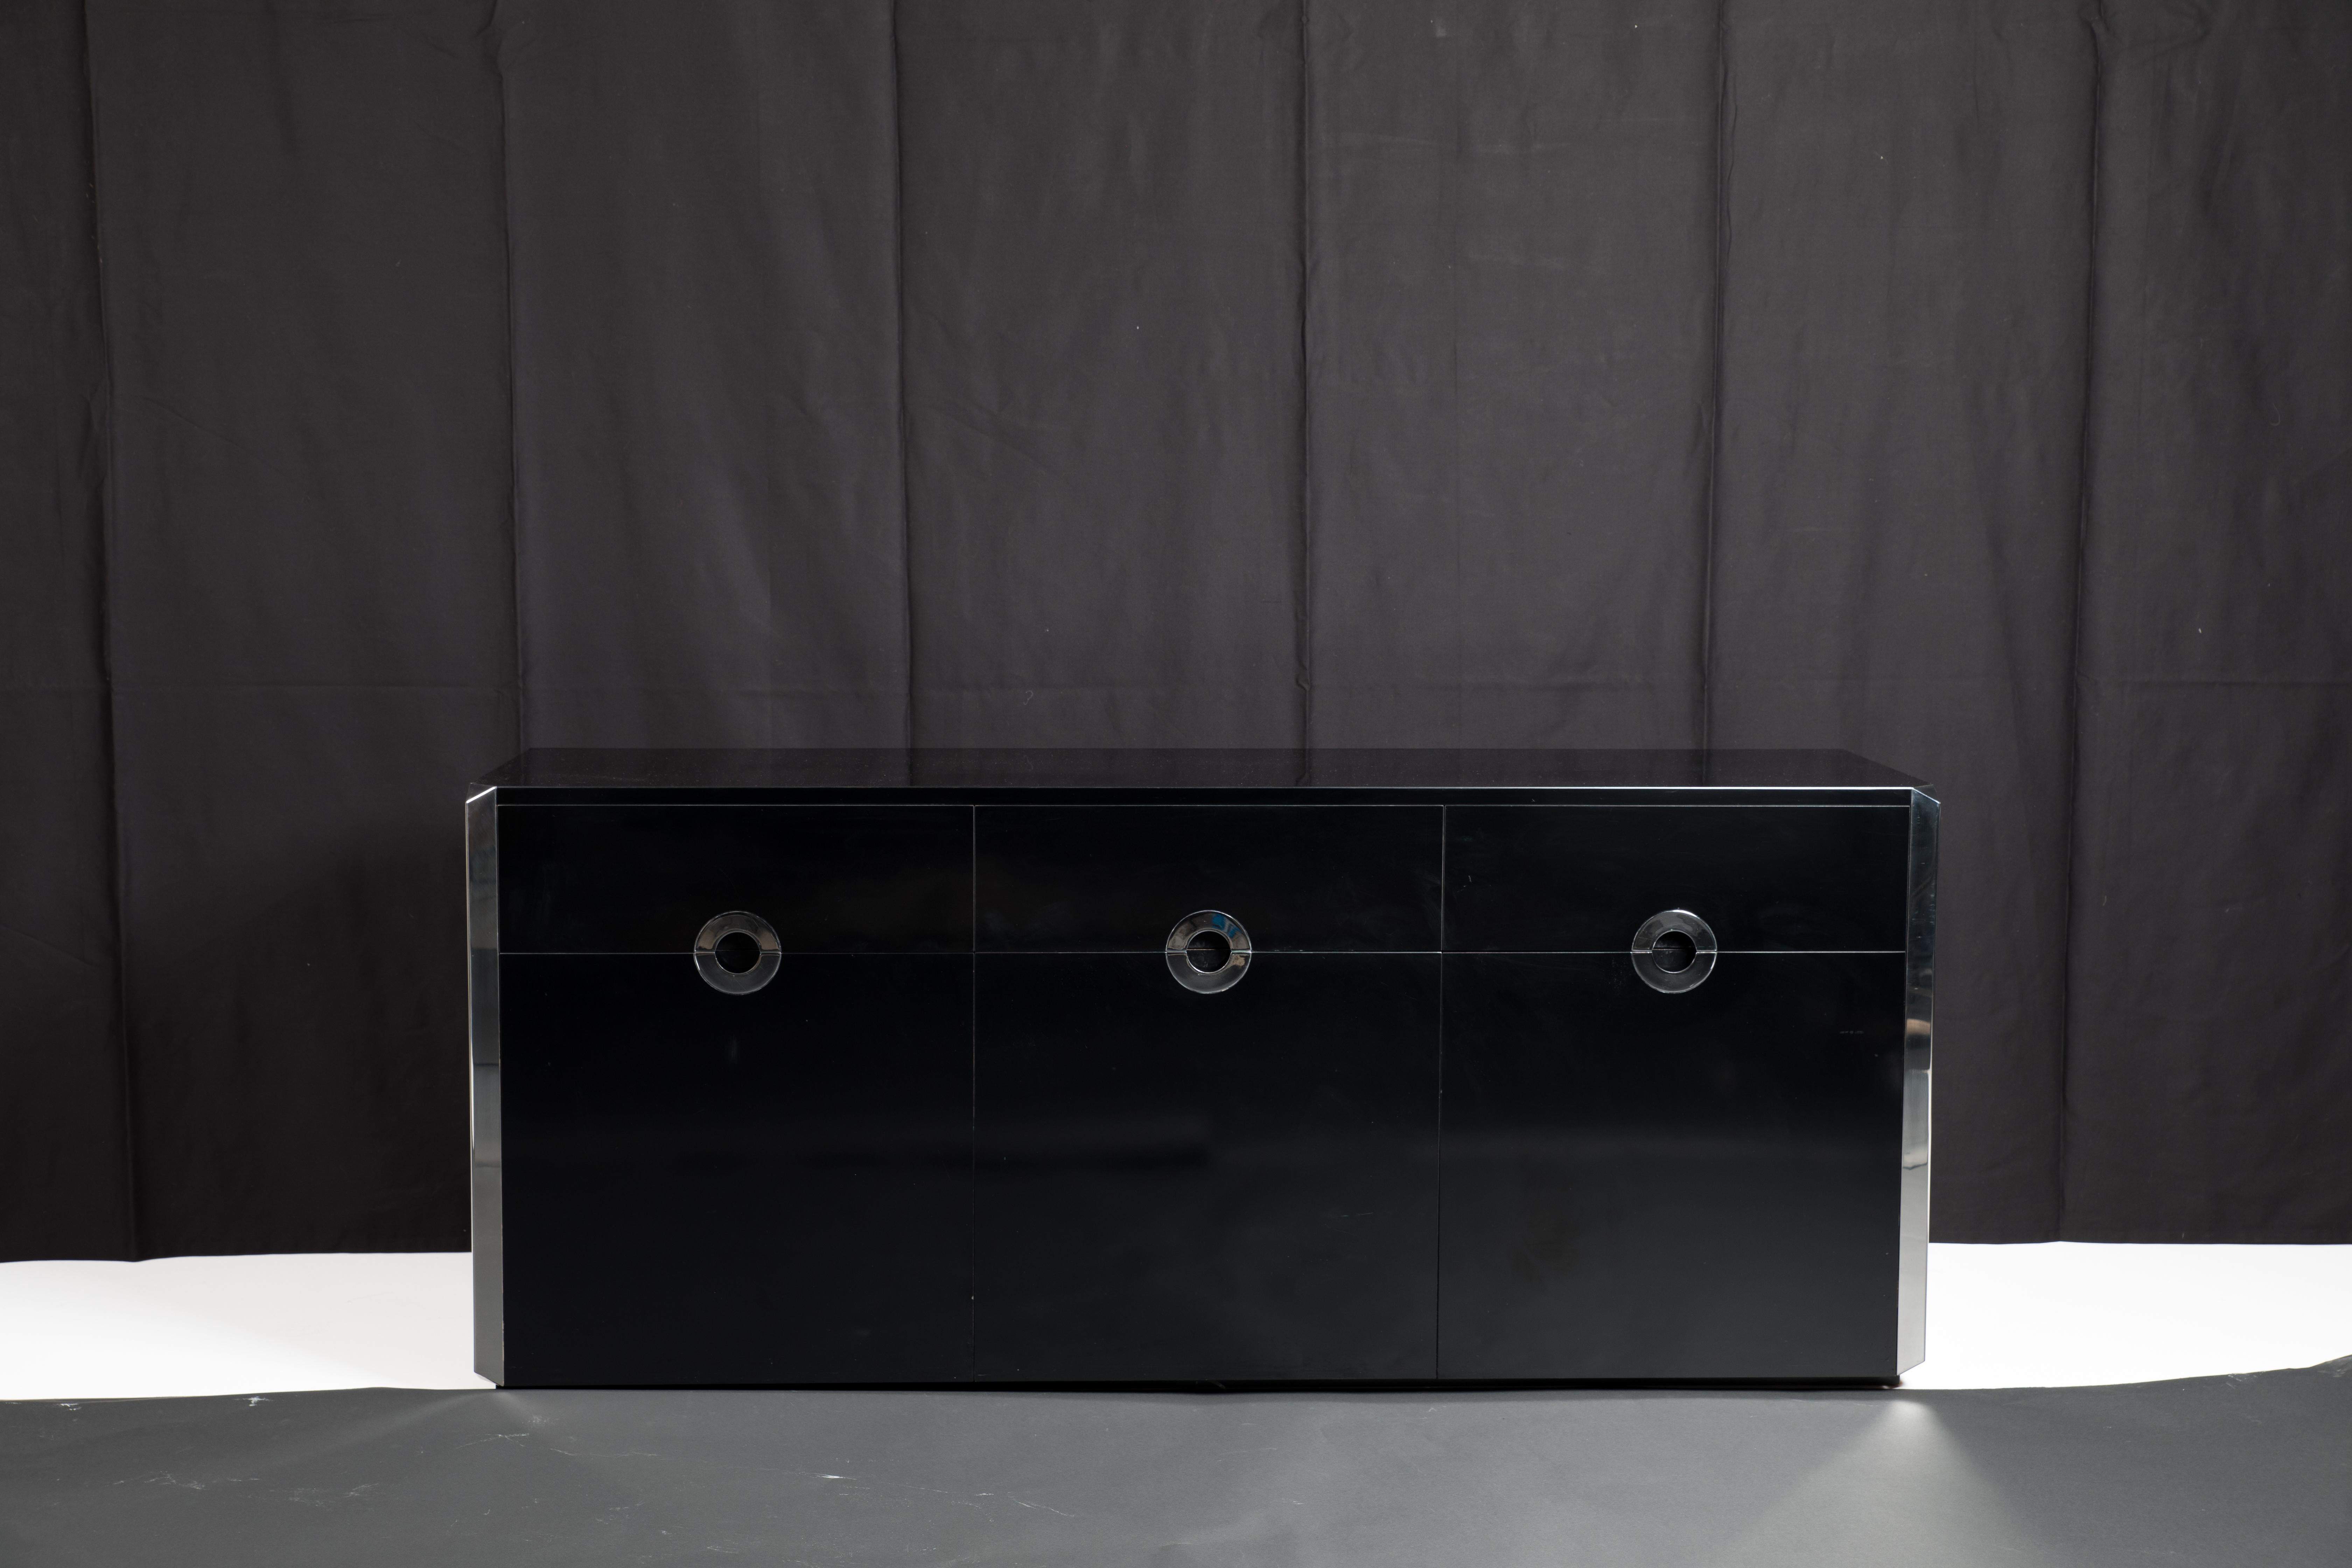 Black laminate and chromed steel side board designed by Willy Rizzo and manufactured by Mario Sabot in Italy in 1972. Limited to a production of 2000 total, these were produced in white, black, and brown. Chromed steel edges and drawer pulls on